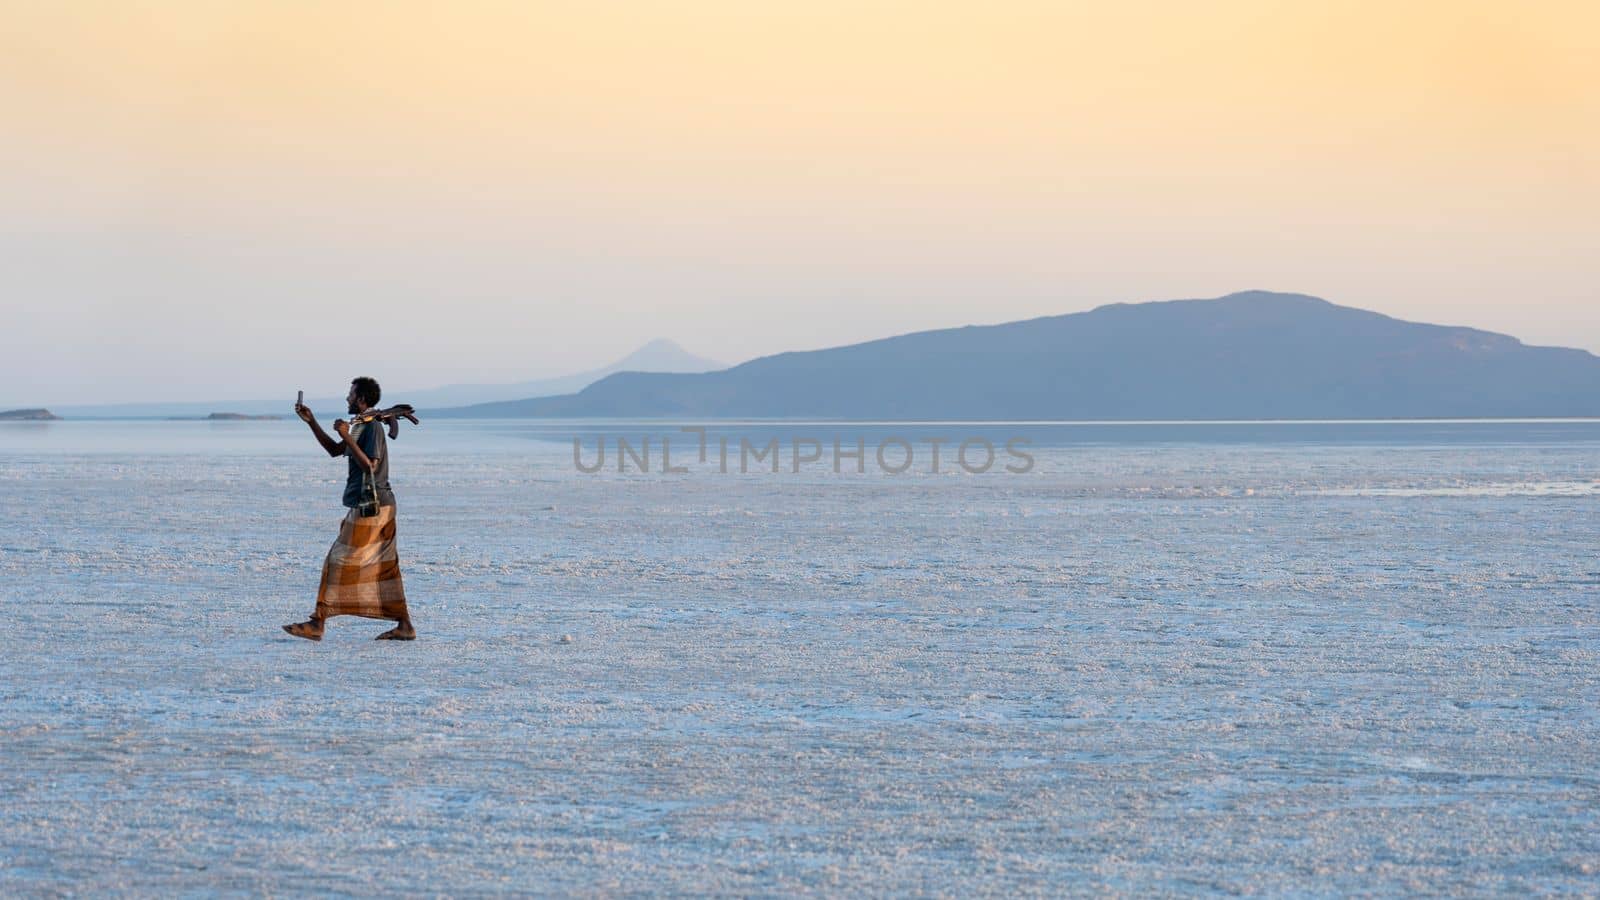 Sunset on the salt plains of Asale Lake in the Danakil Depression in Ethiopia, Africa.